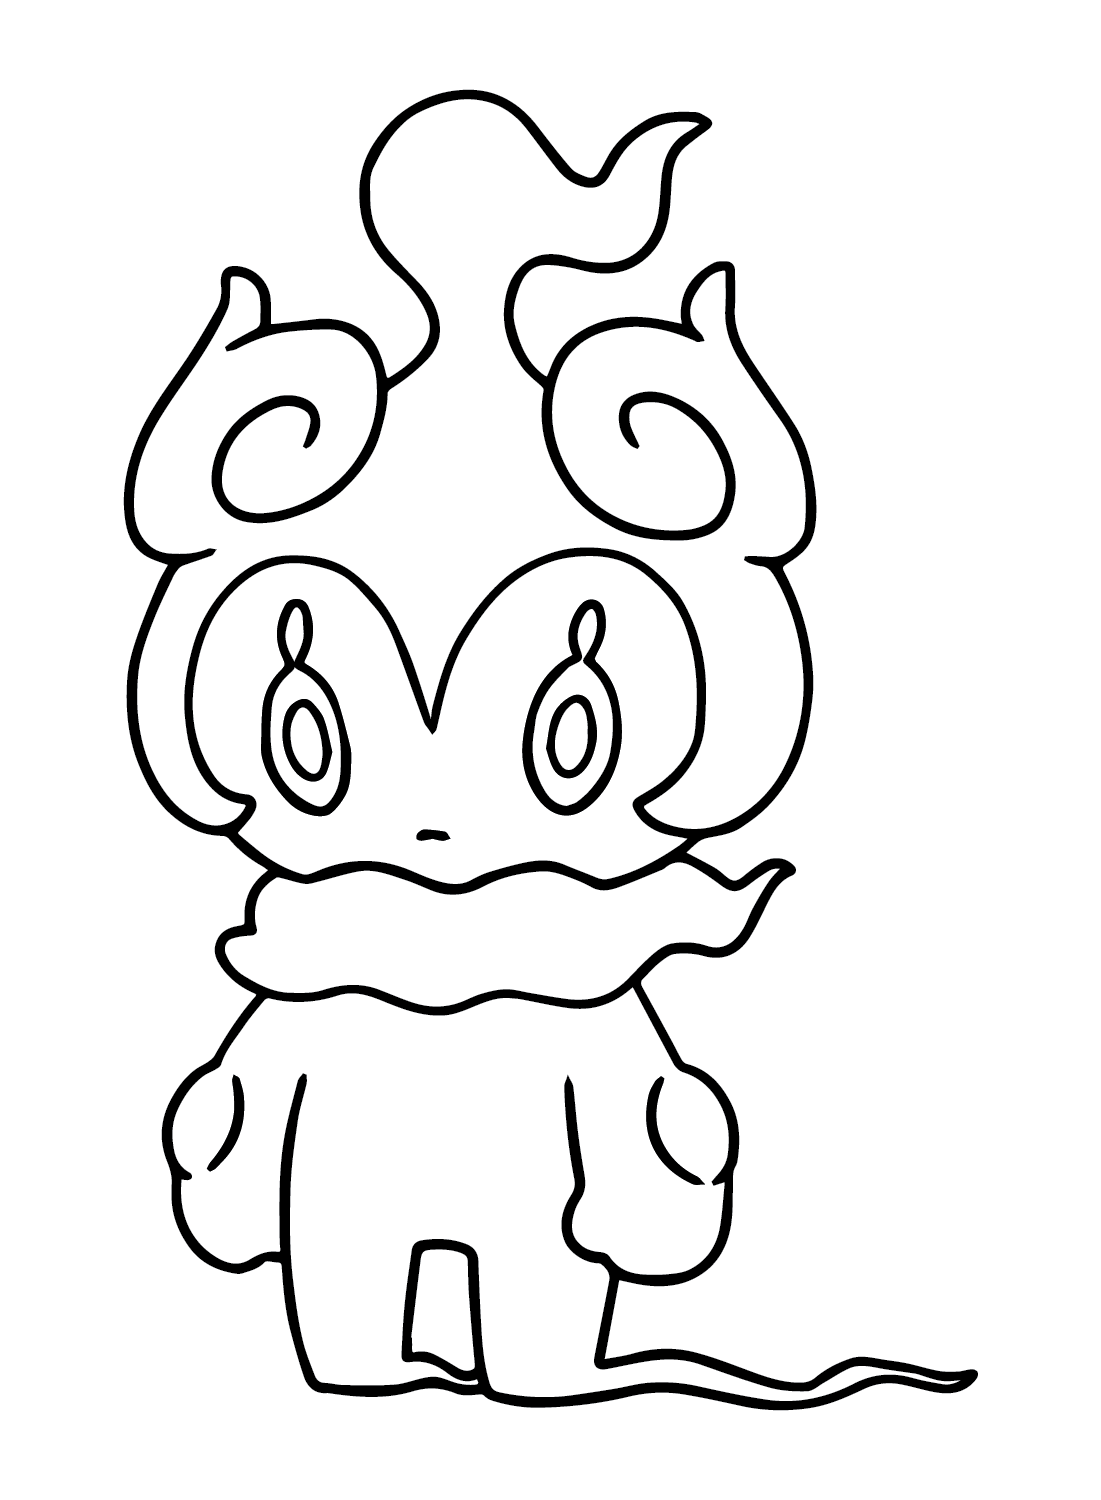 Marshadow to Color Coloring Page